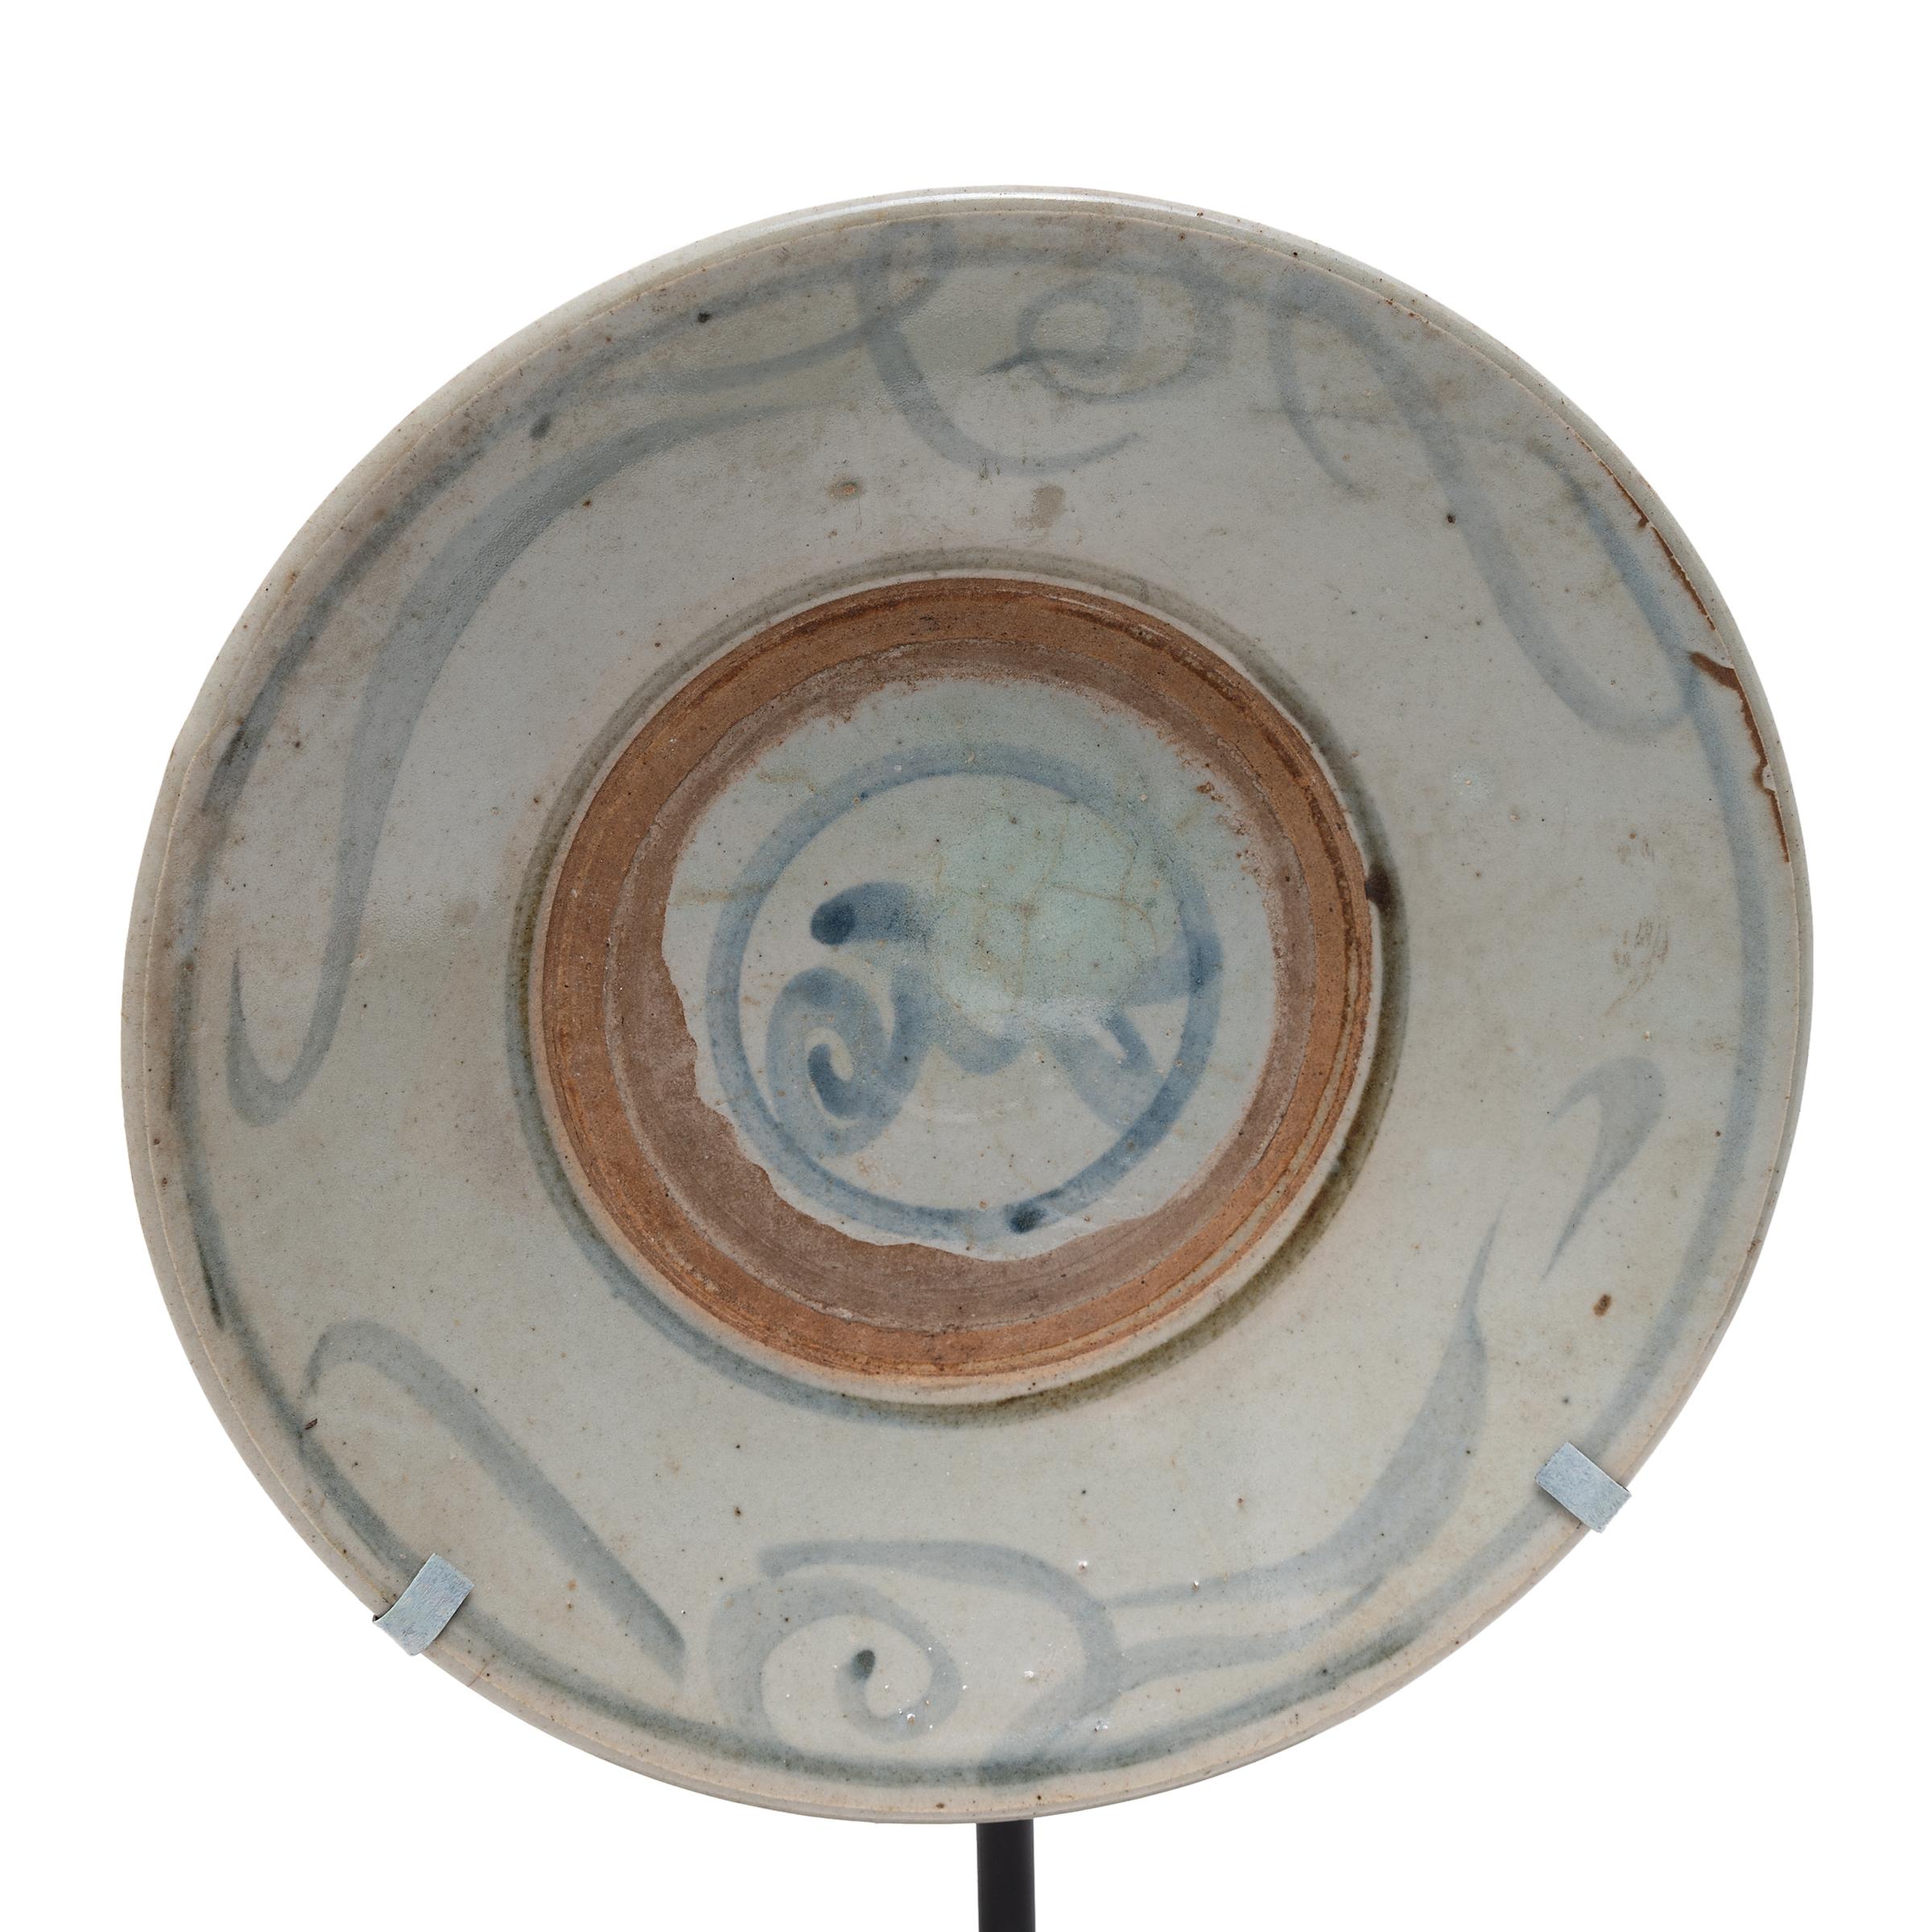 Calligraphic sweeps of blue bring this 19th-century footed plate to life, brushed atop a blue-grey glaze that cloaks its simple ceramic form. Once used as an everyday serving dish, this rustic plate has been reimagined as a tabletop sculpture,